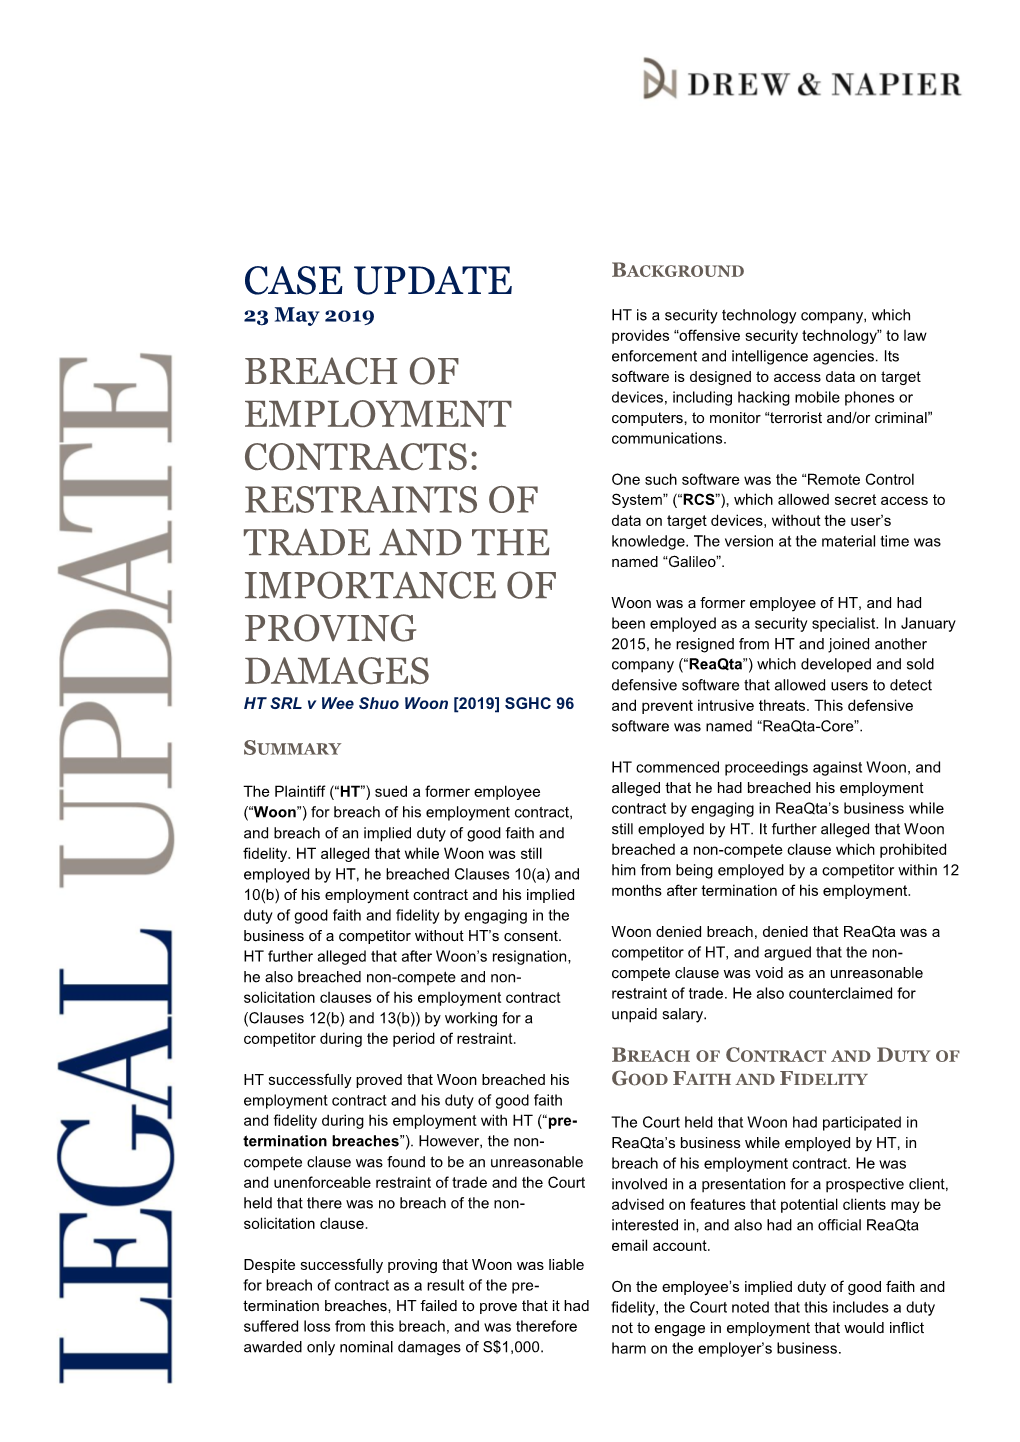 Breach of Employment Contracts: Restraints of Trade and The